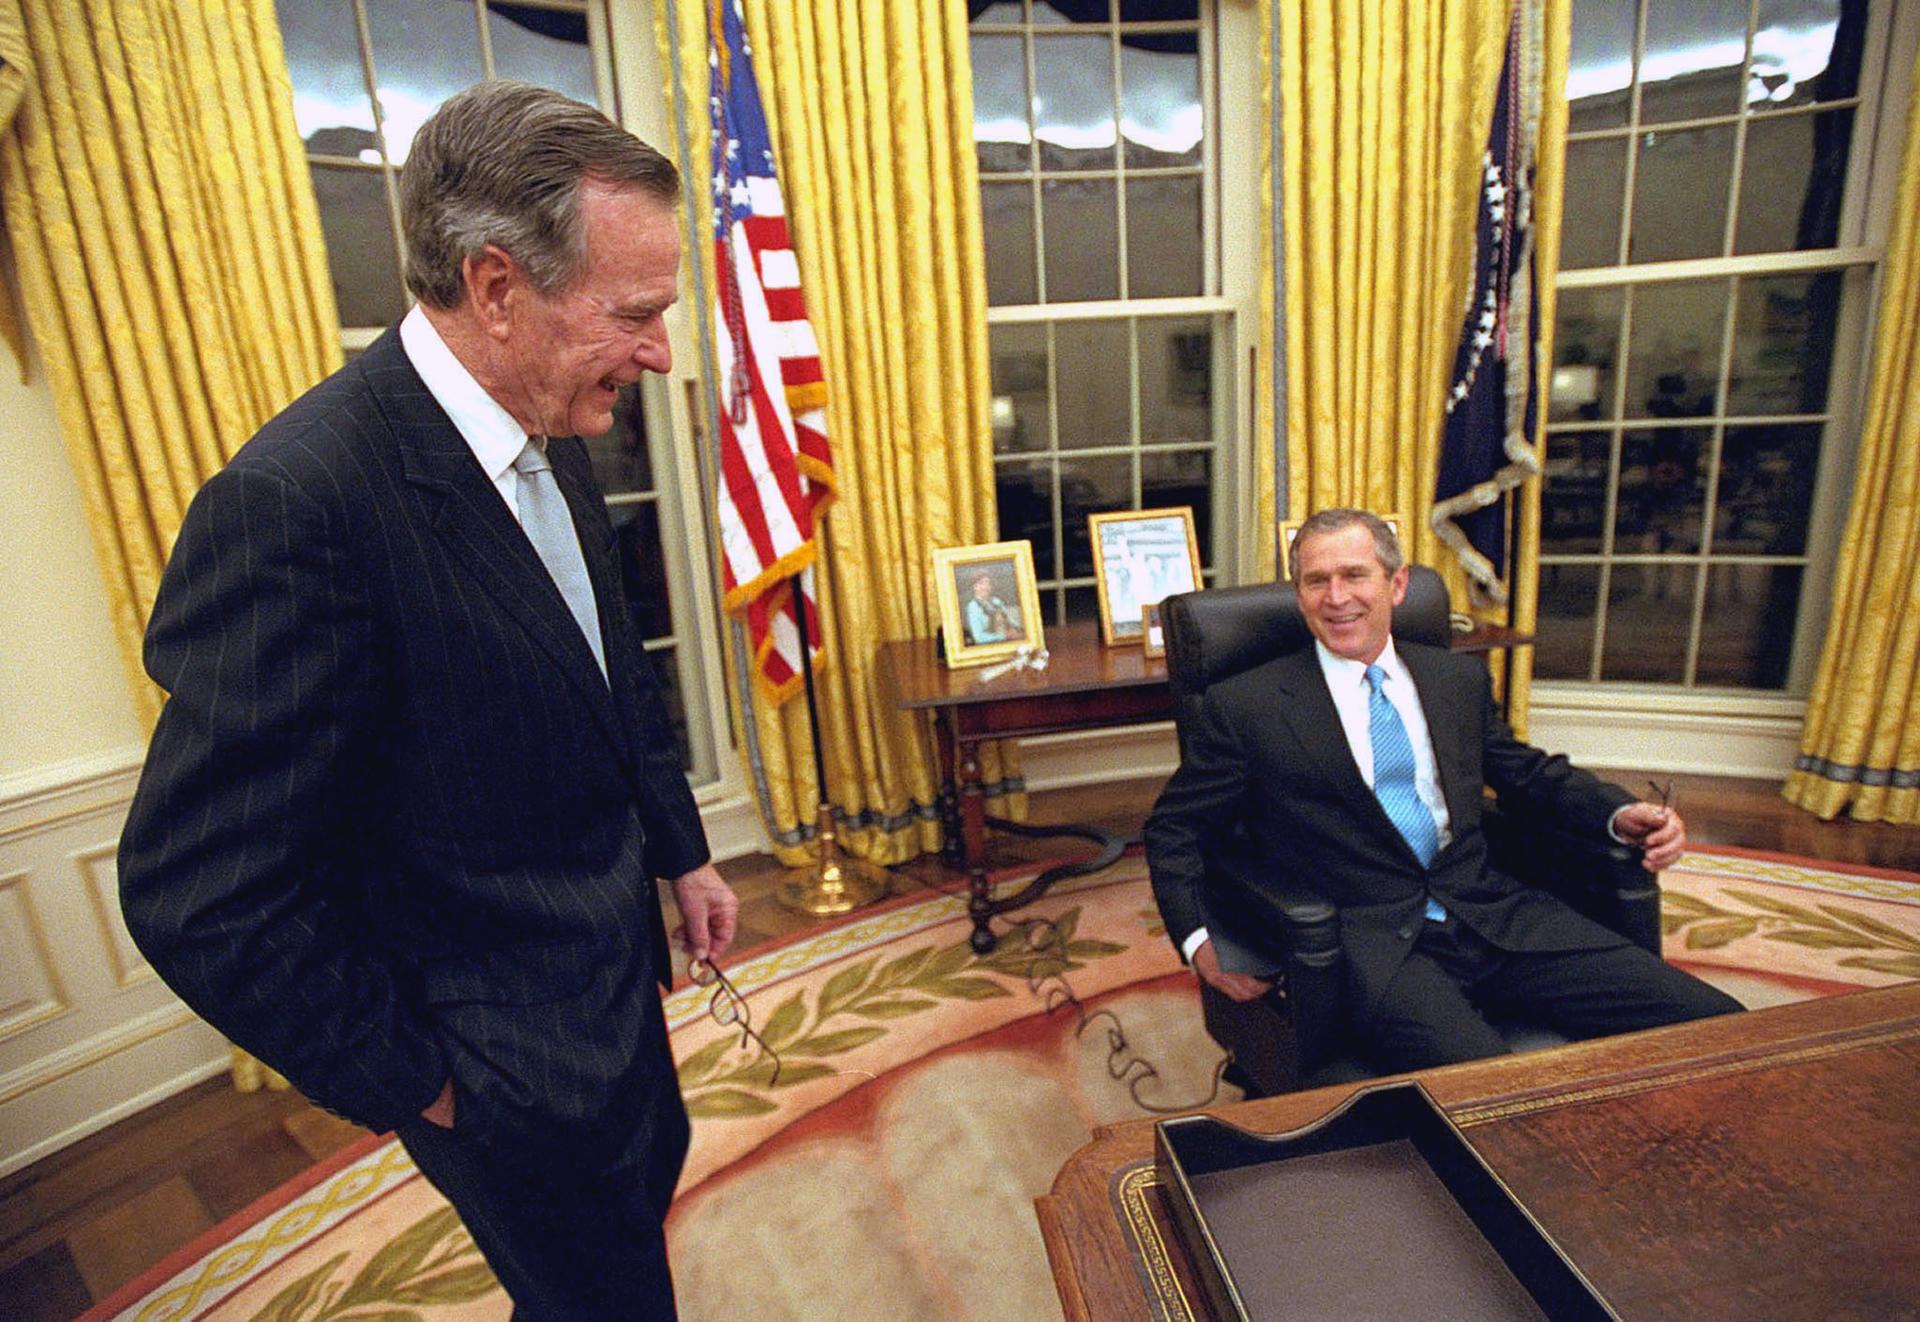 George W. Bush sits at the desk in the Oval Office while his father, H.W. Bush, stands off to the left.